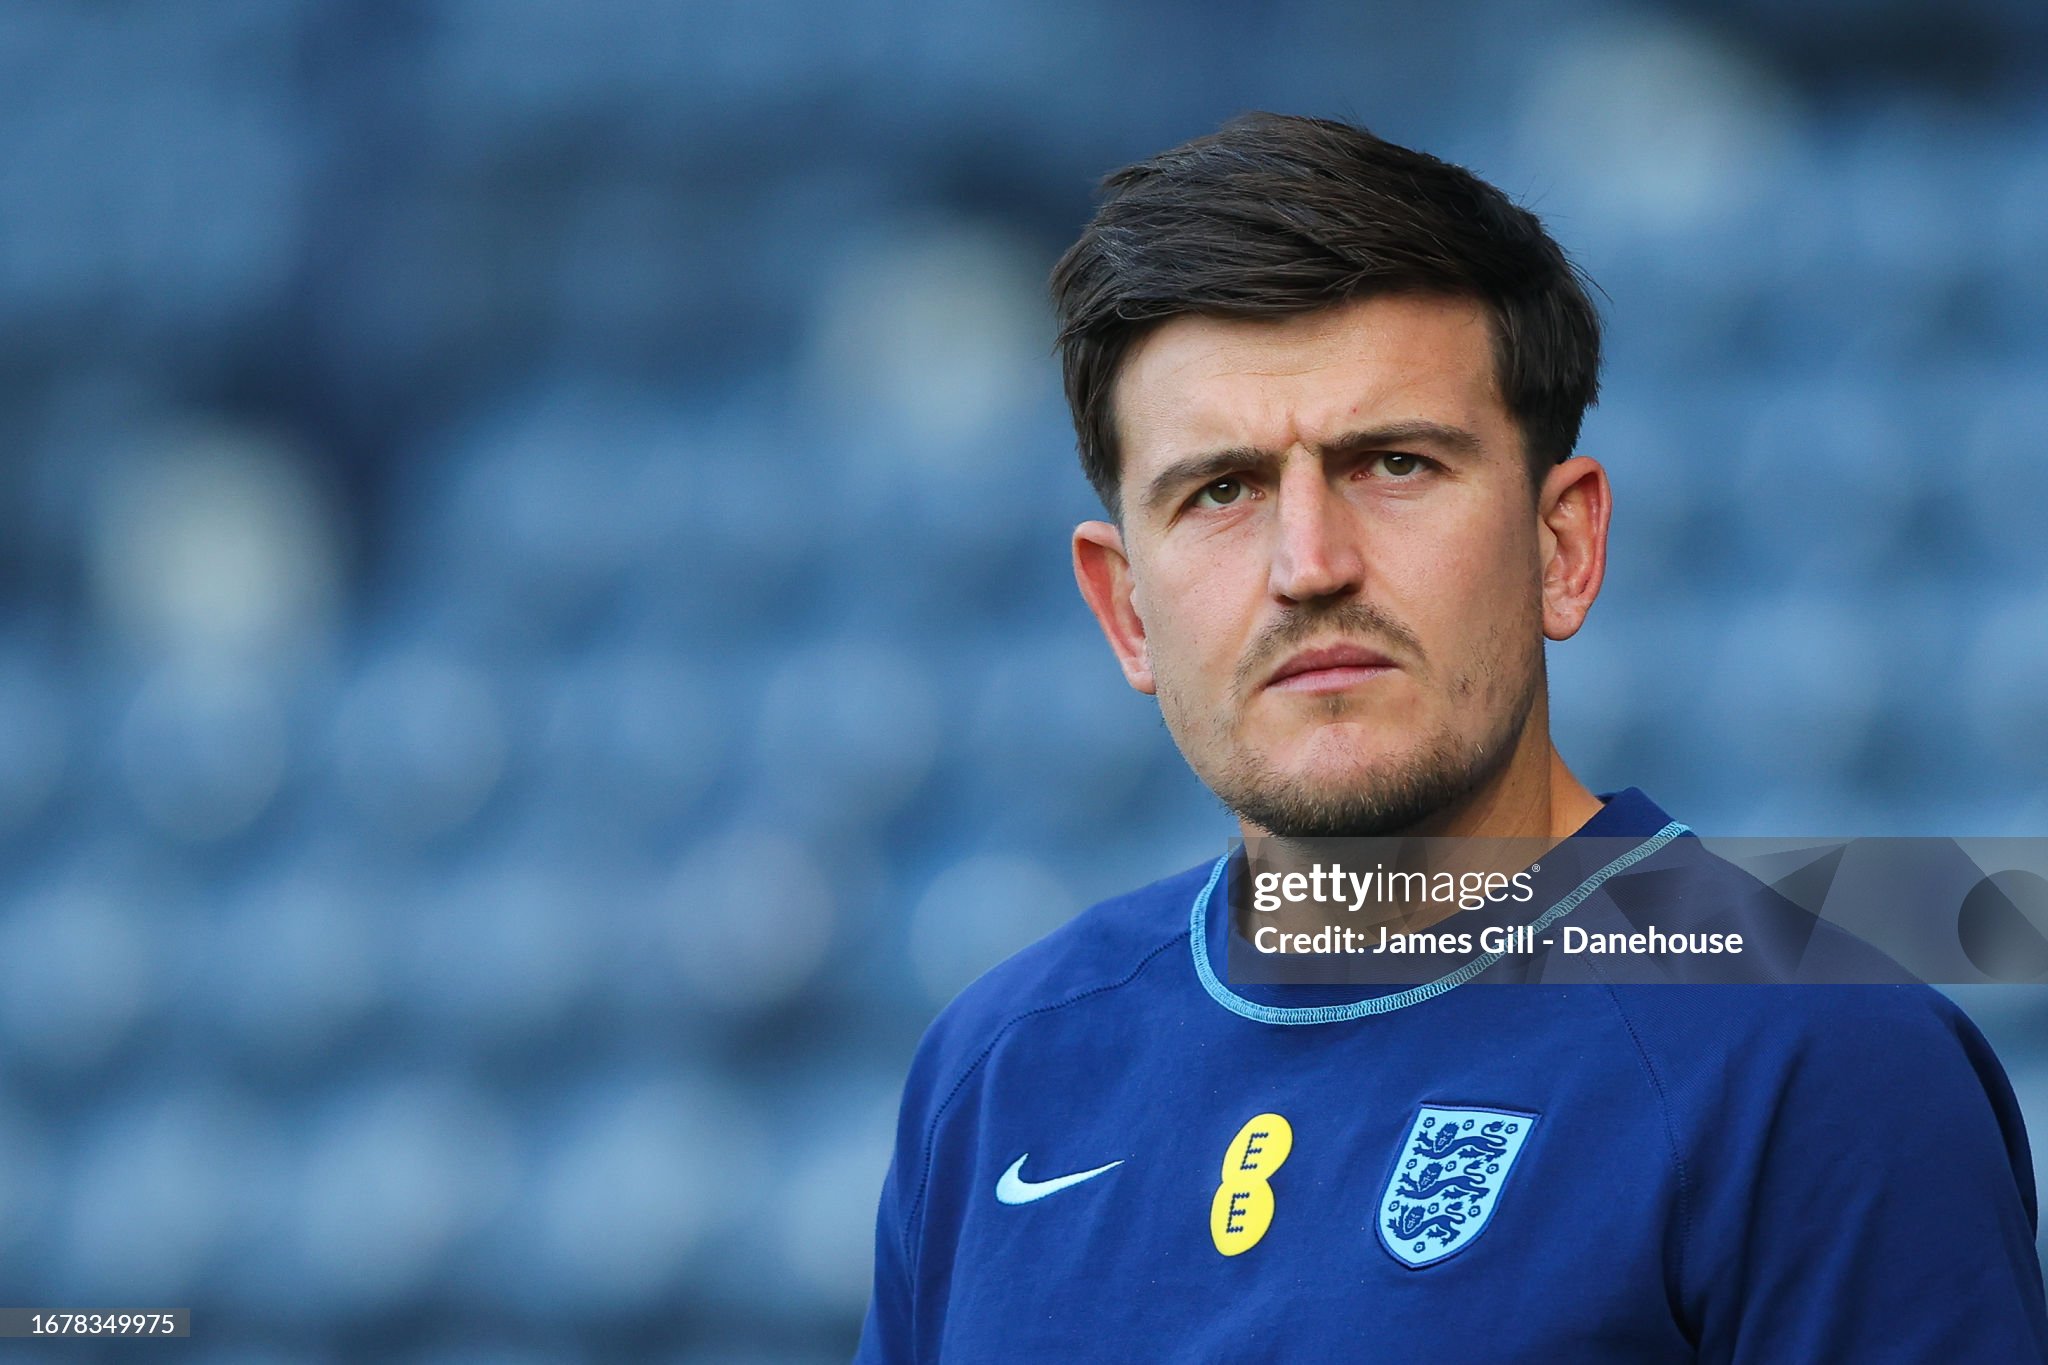 Southgate should not call up Maguire for his own good